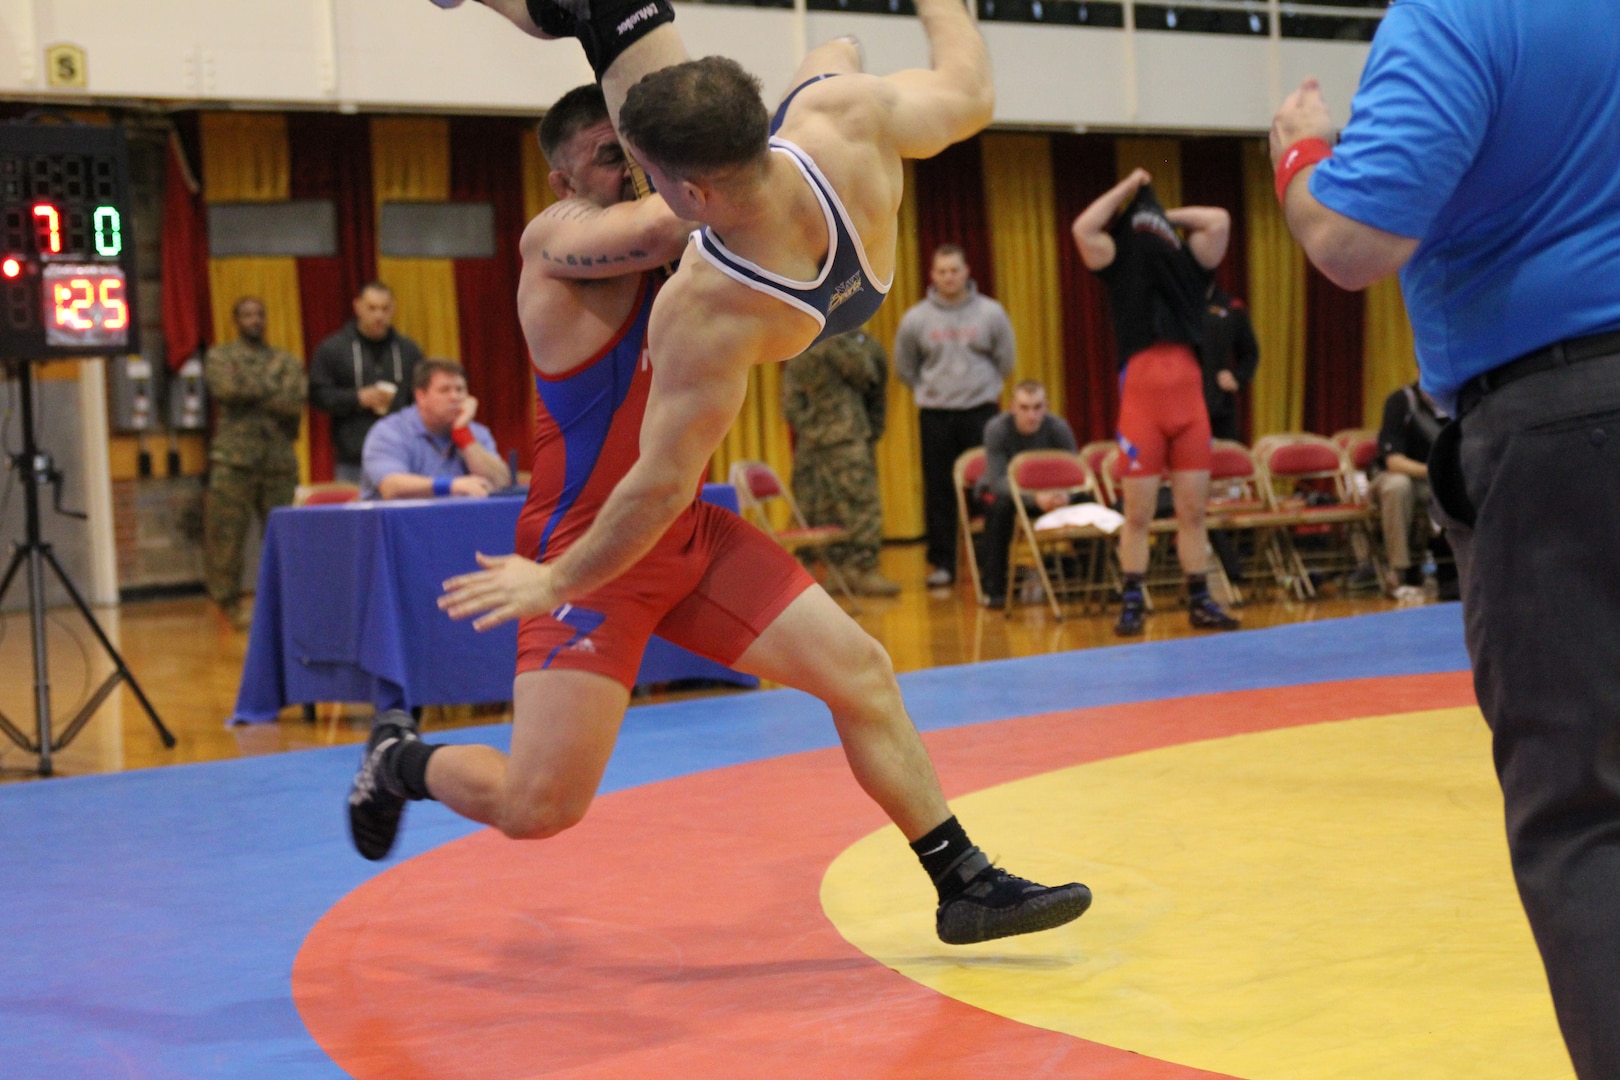 Marine Cpl Courtney Myers (Camp Lejeune, NC) slams Navy PO2 Gary DiMarzio (Kings Bay, GA) to the mat in a 12-0 win at the 2014 Armed Forces Wrestling Championship at MCB Camp Lejeune, NC 7-8 March.  